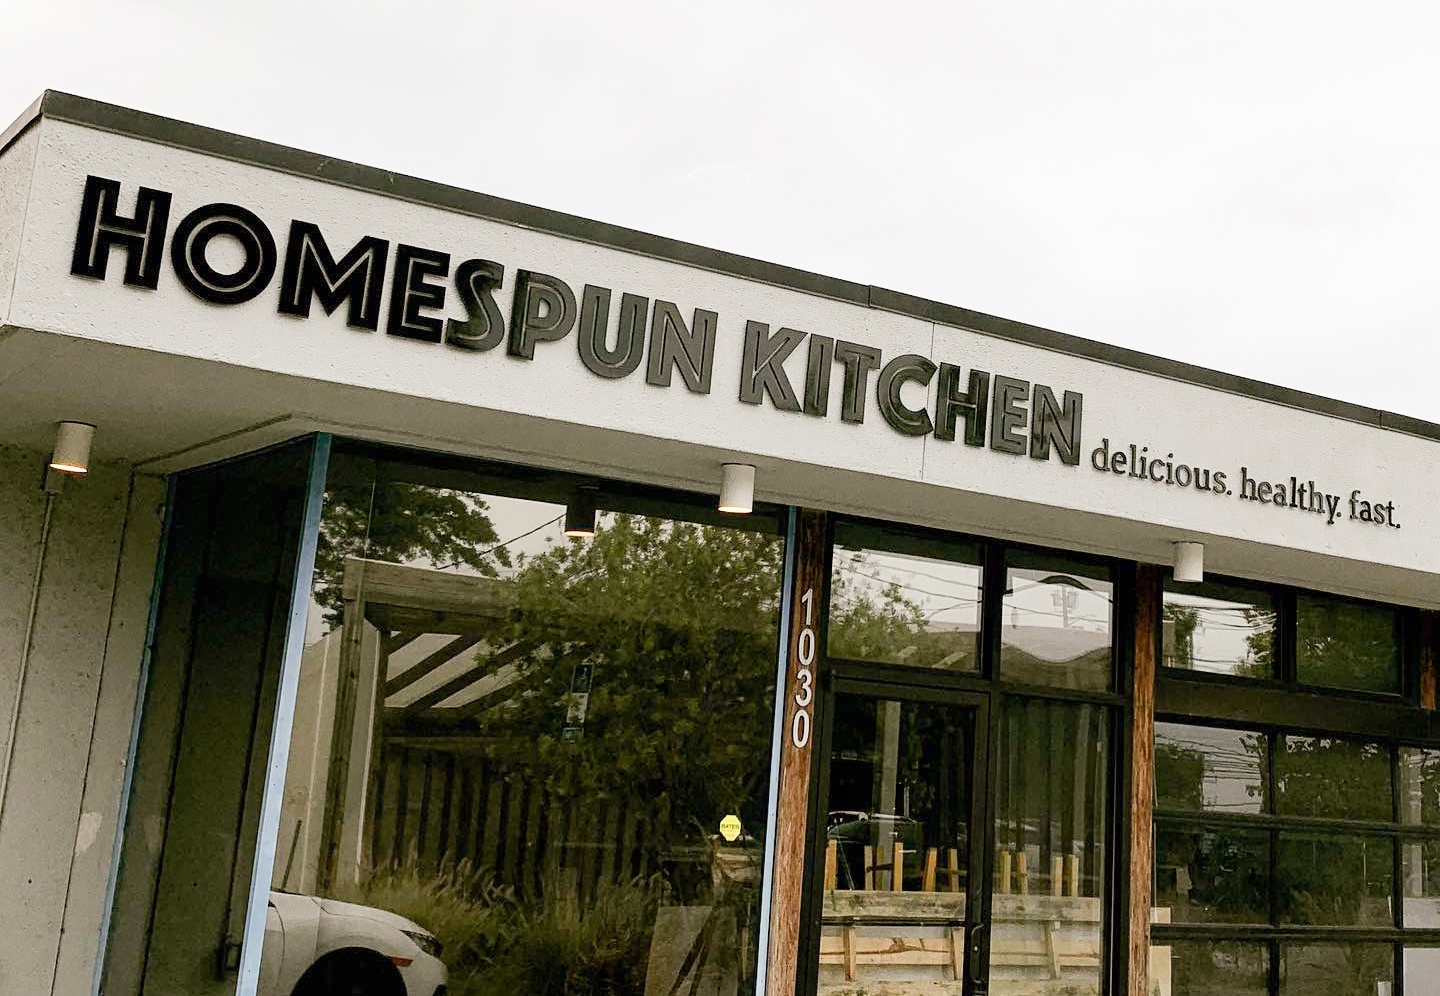 Homespun Kitchen posted this photo of their 1030 Oak St. location on Facebook.